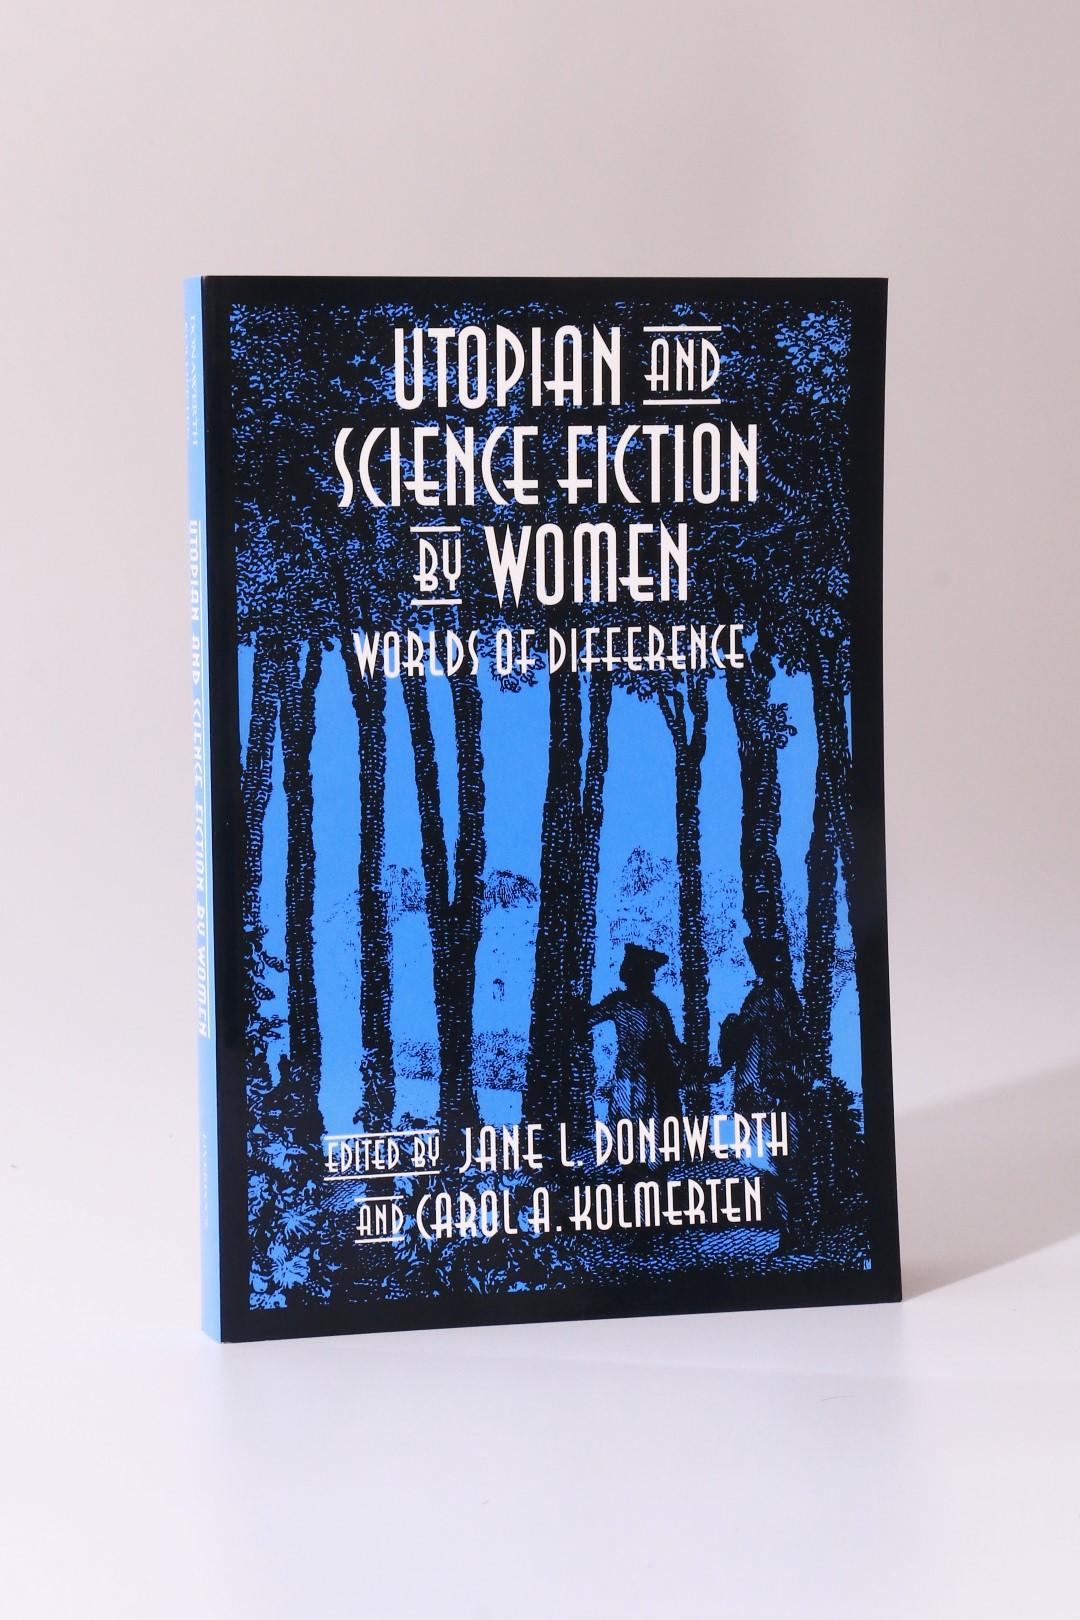 Jane L. Donawerth and Carol A. Kolmerten - Utopian and Science Fiction by Women: Worlds of Difference - Liverpool University Press, 1994, First Edition.